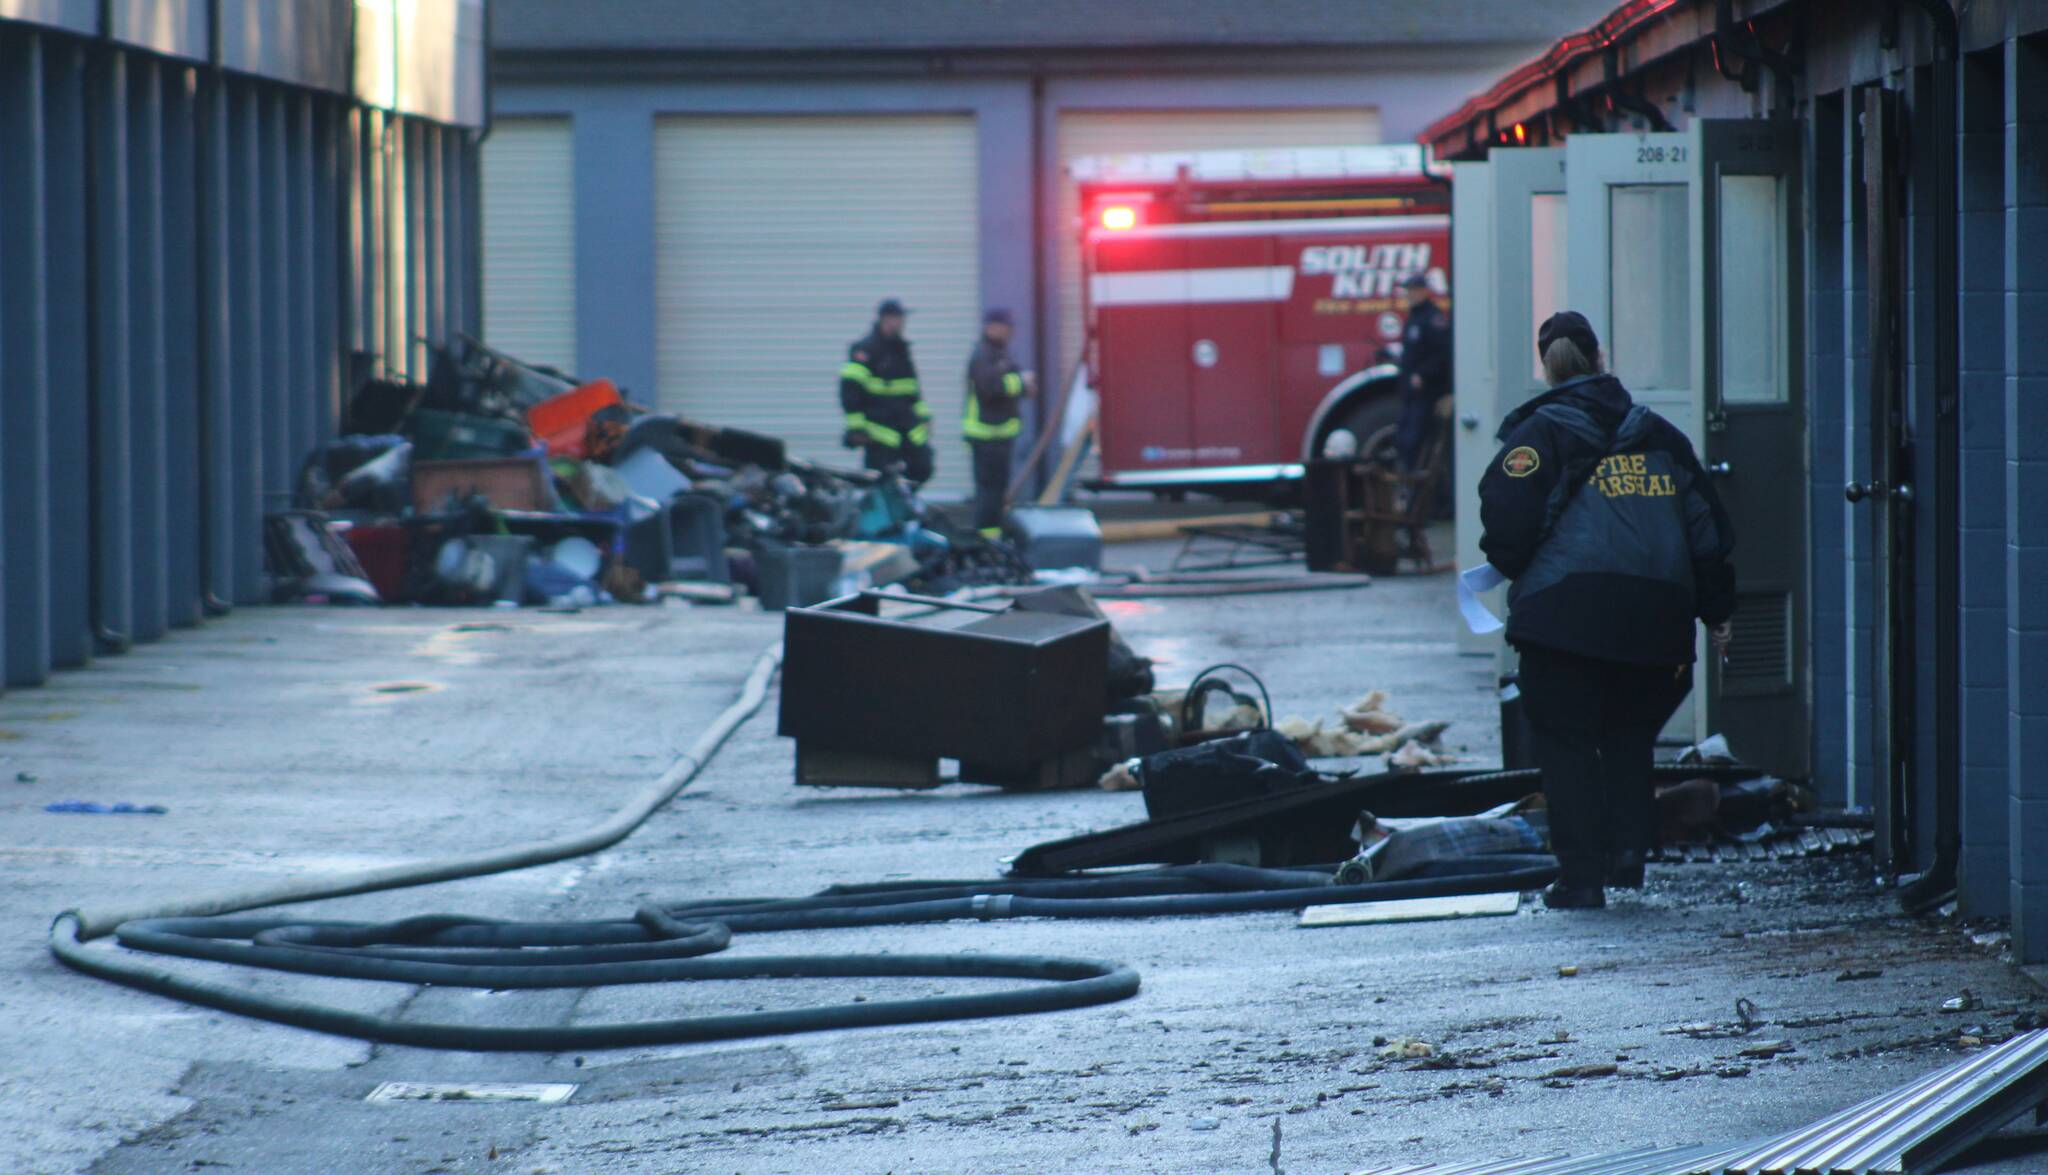 Elisha Meyer/Kitsap News Group photos
Officials work to investigate the cause of a fire at Port Orchard Self Storage.